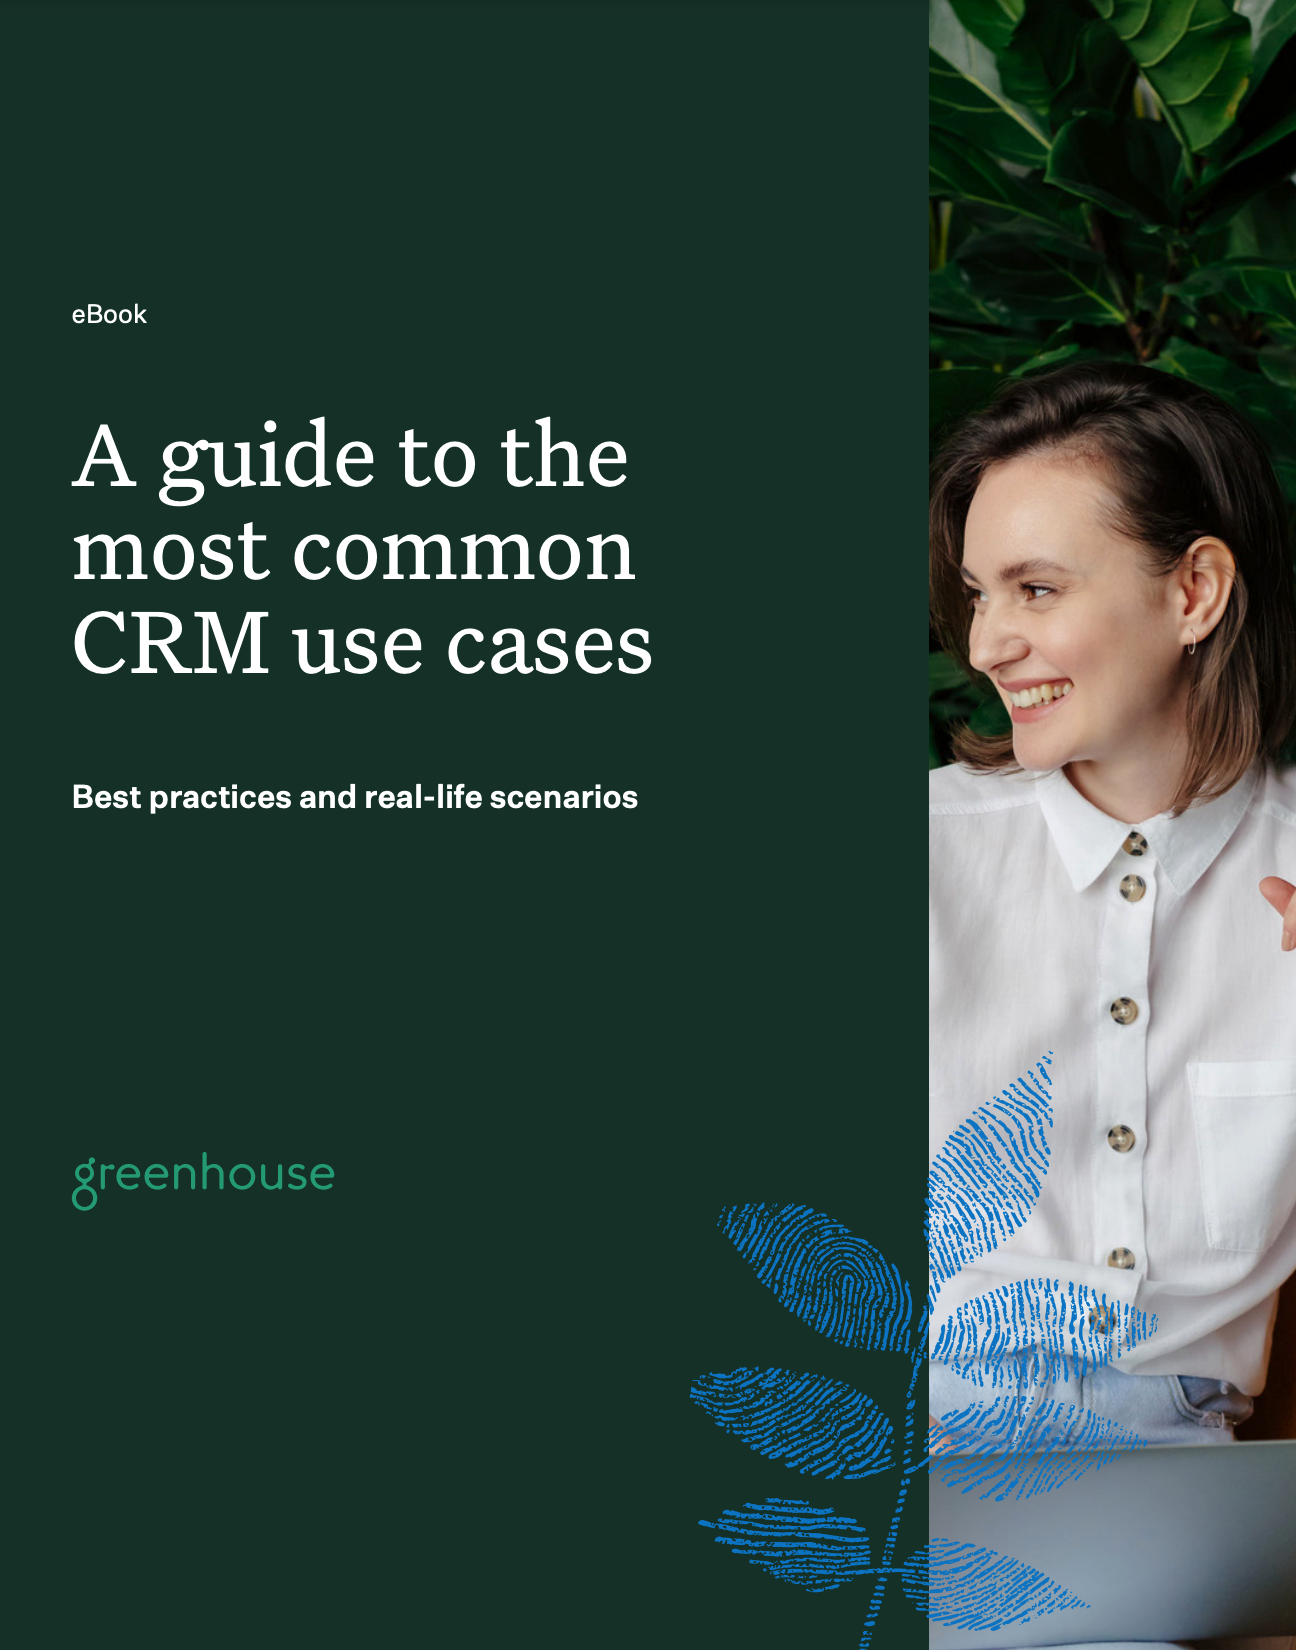 crm-use-cases-ebook.png